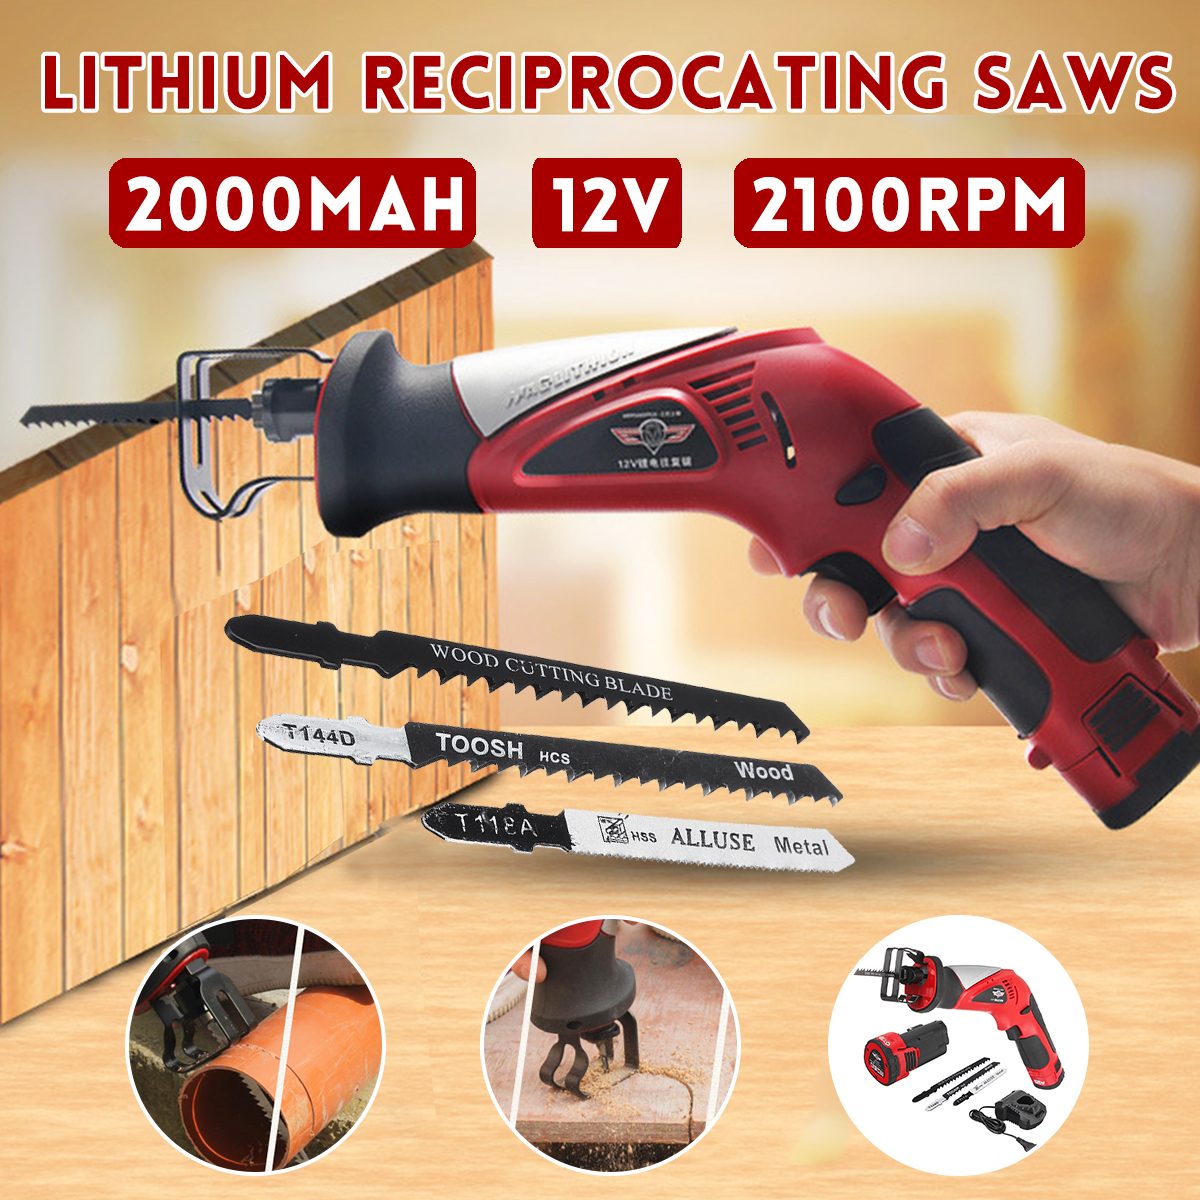 2000mAh-Li-Ion-12V-Cordless-Electric-Reciprocating-Saw-Rechargeable-For-BOSCHT118A-T127D-1583617-1